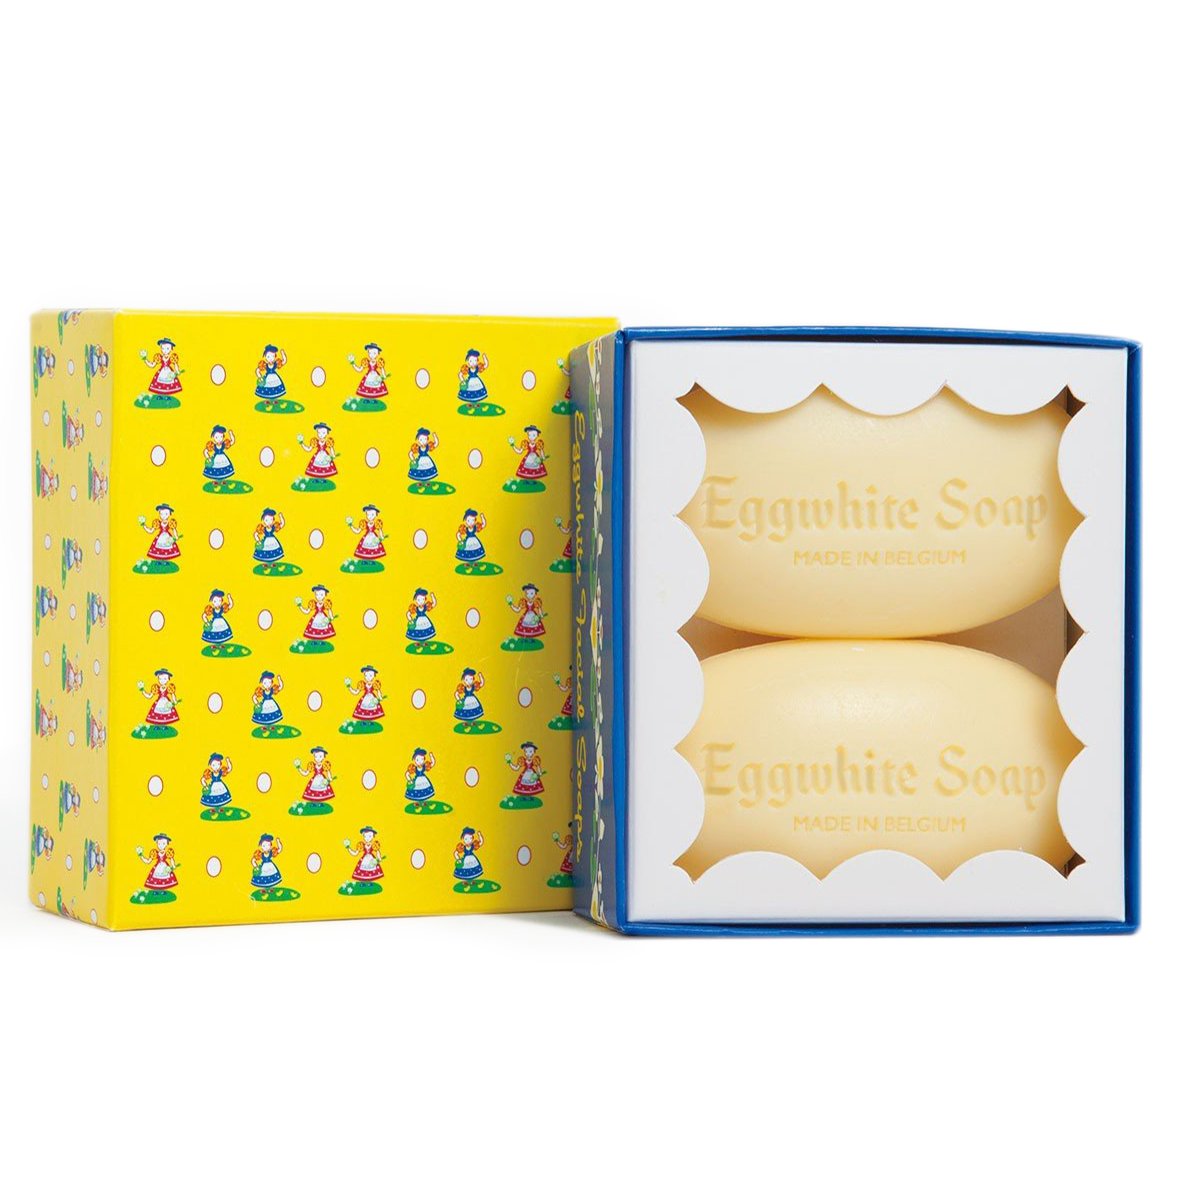 The image shows a box of Eggwhite Facial Mask 2 bar Gift Box made in Belgium by Soaps, Soaks & Pampering Products From Around the World. The box is yellow and blue with a pattern of women wearing bonnets and aprons. The opening displays two oval-shaped soap bars, perfect for adding a youthful glow to your skincare routine. The text on the soap reads "Eggwhite Soap Made in Belgium.